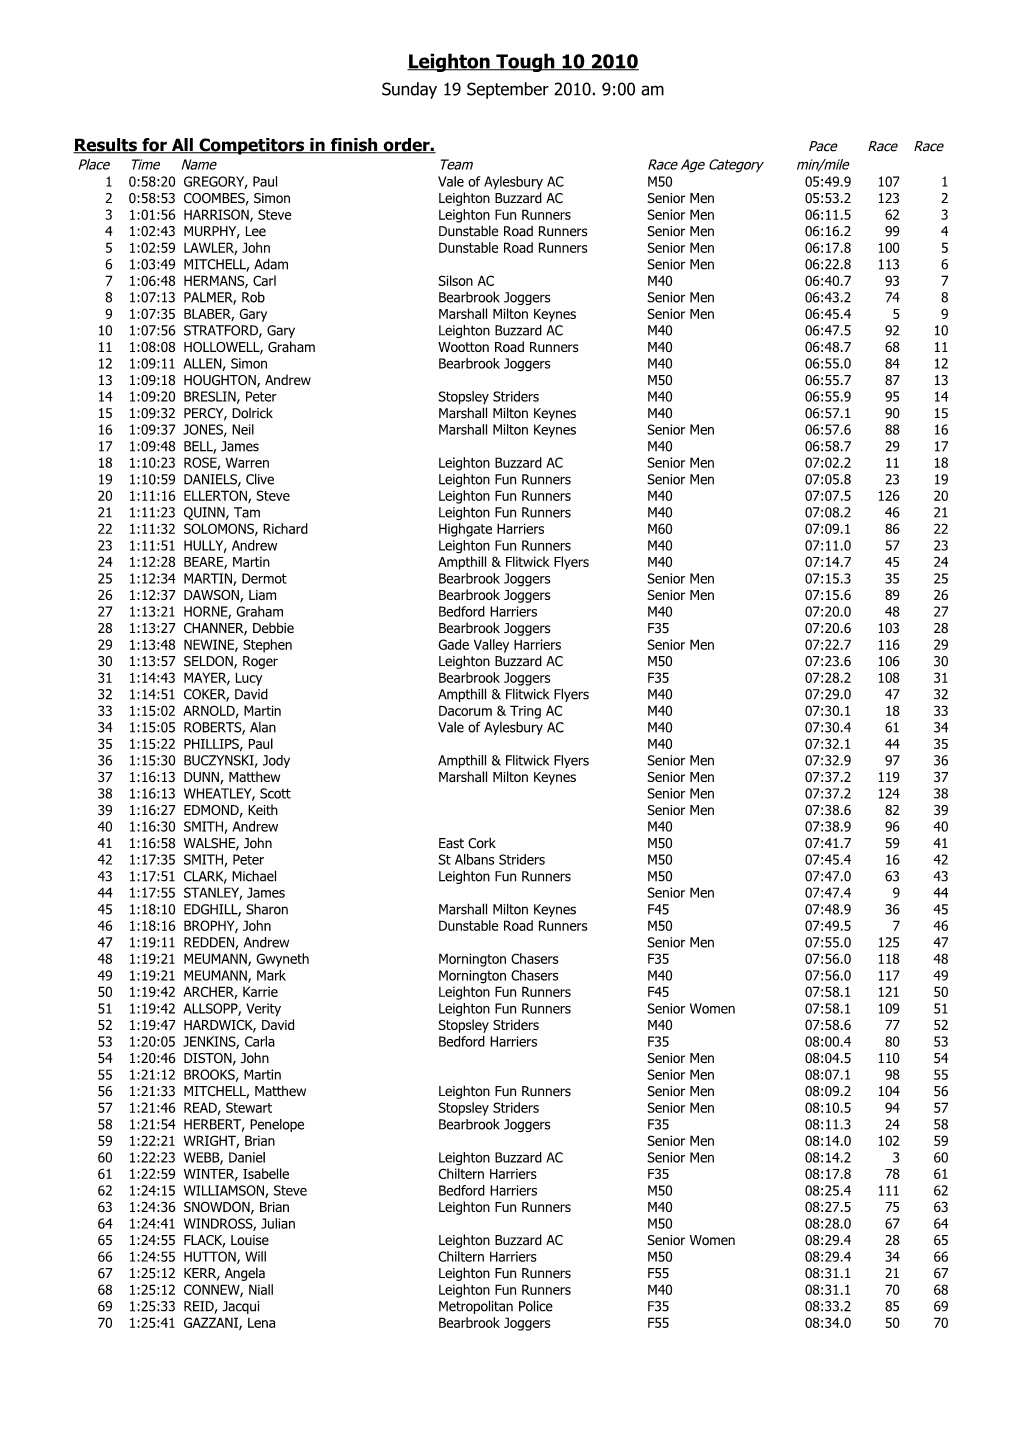 Results for All Competitors in Finish Order. Paceracerace